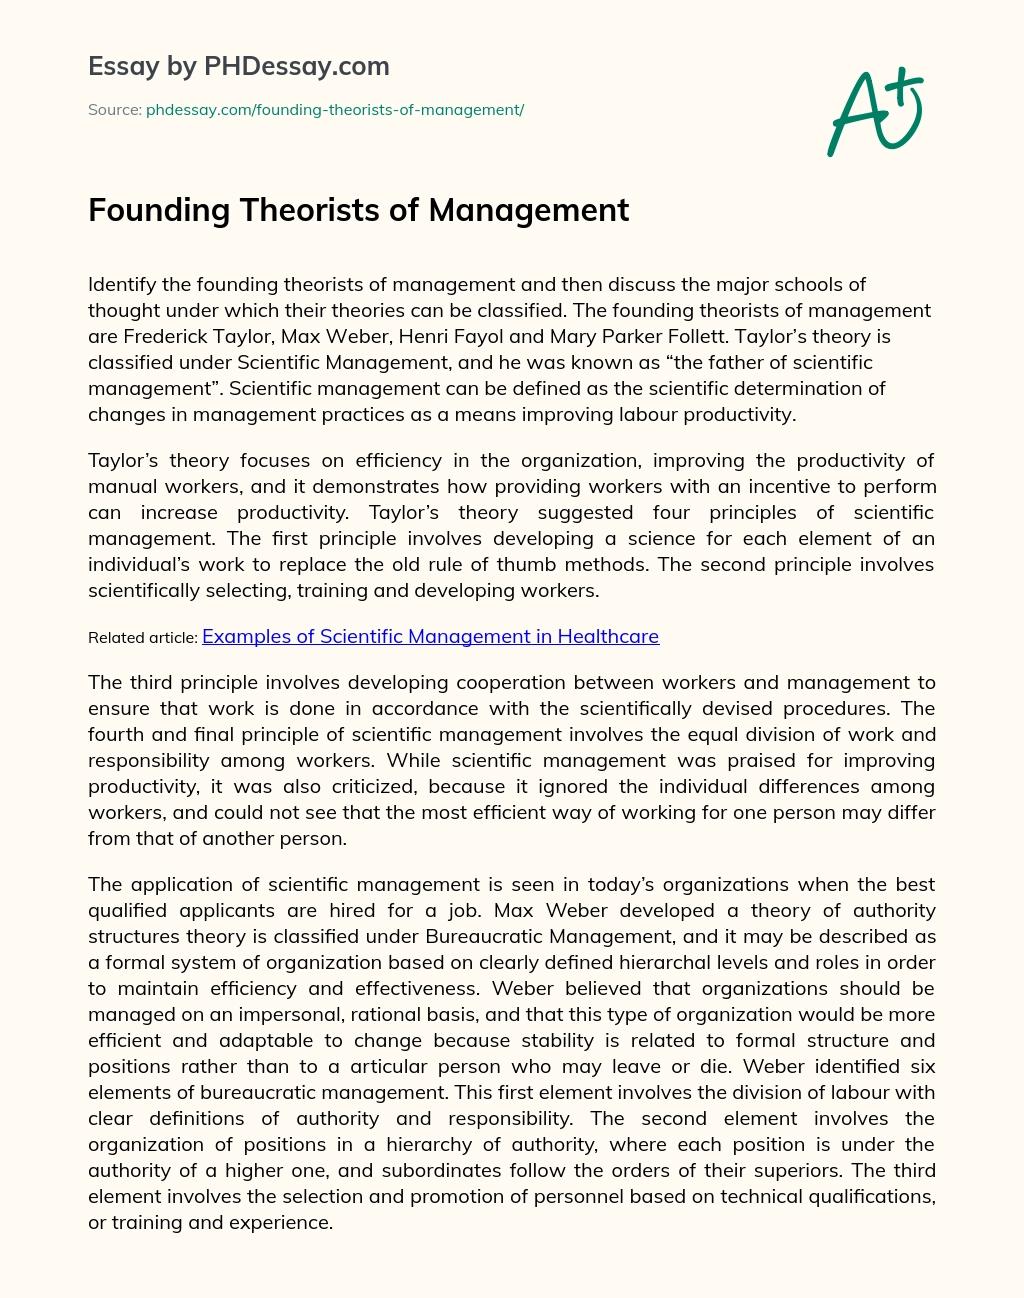 Founding Theorists of Management essay